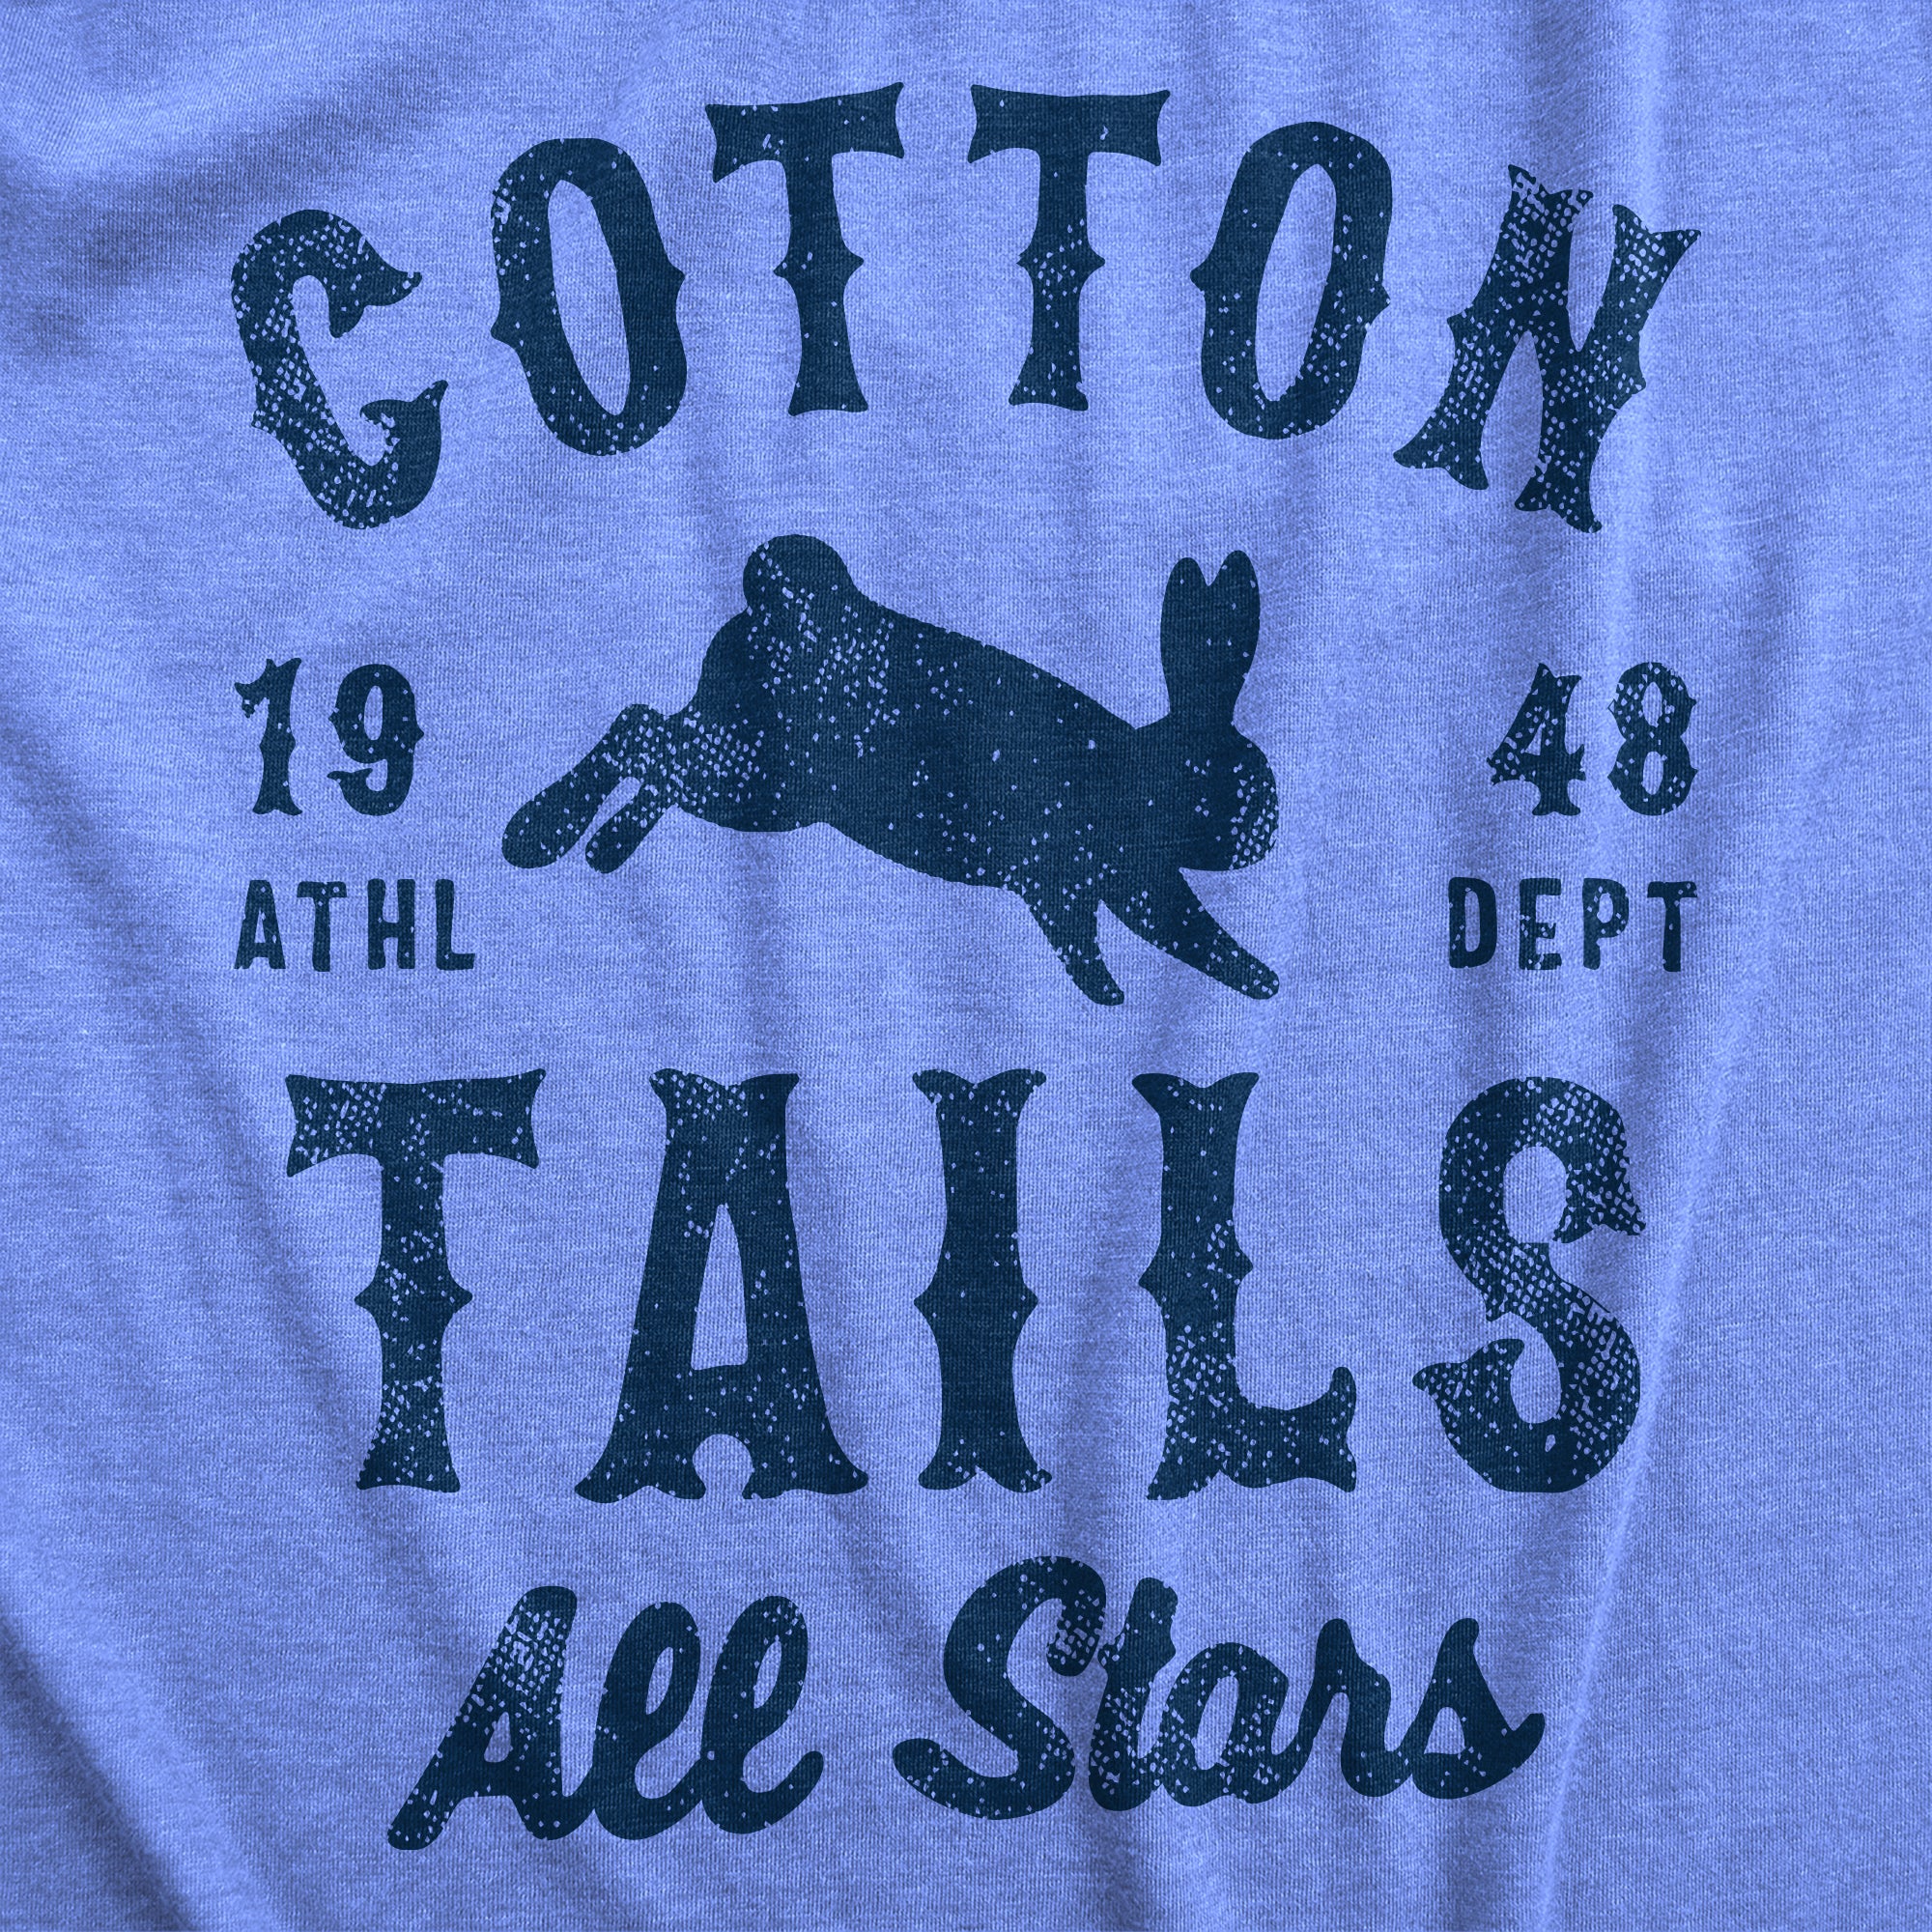 Funny Light Heather Blue - Cotton Tails Cotton Tails All Stars Womens T Shirt Nerdy Easter Tee